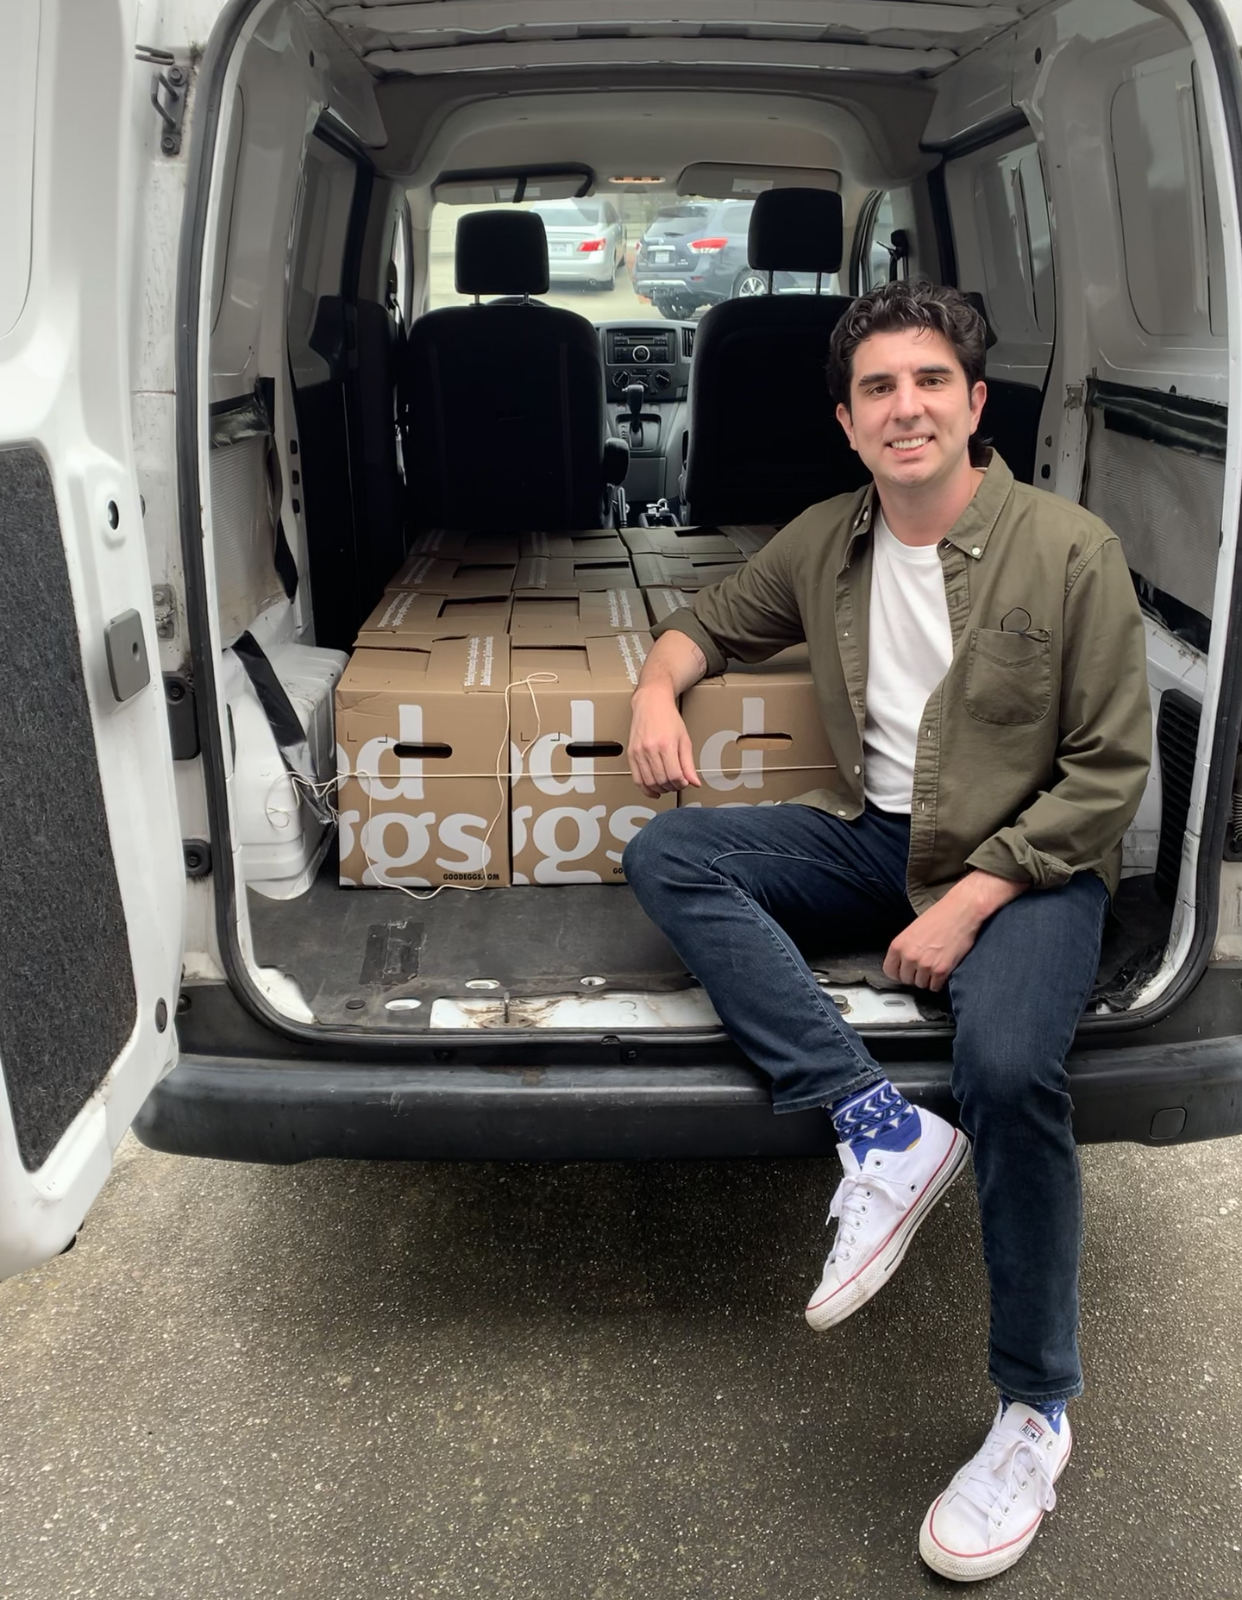 bryan tsiliacos posing inside a van full of boxes ready for delivery